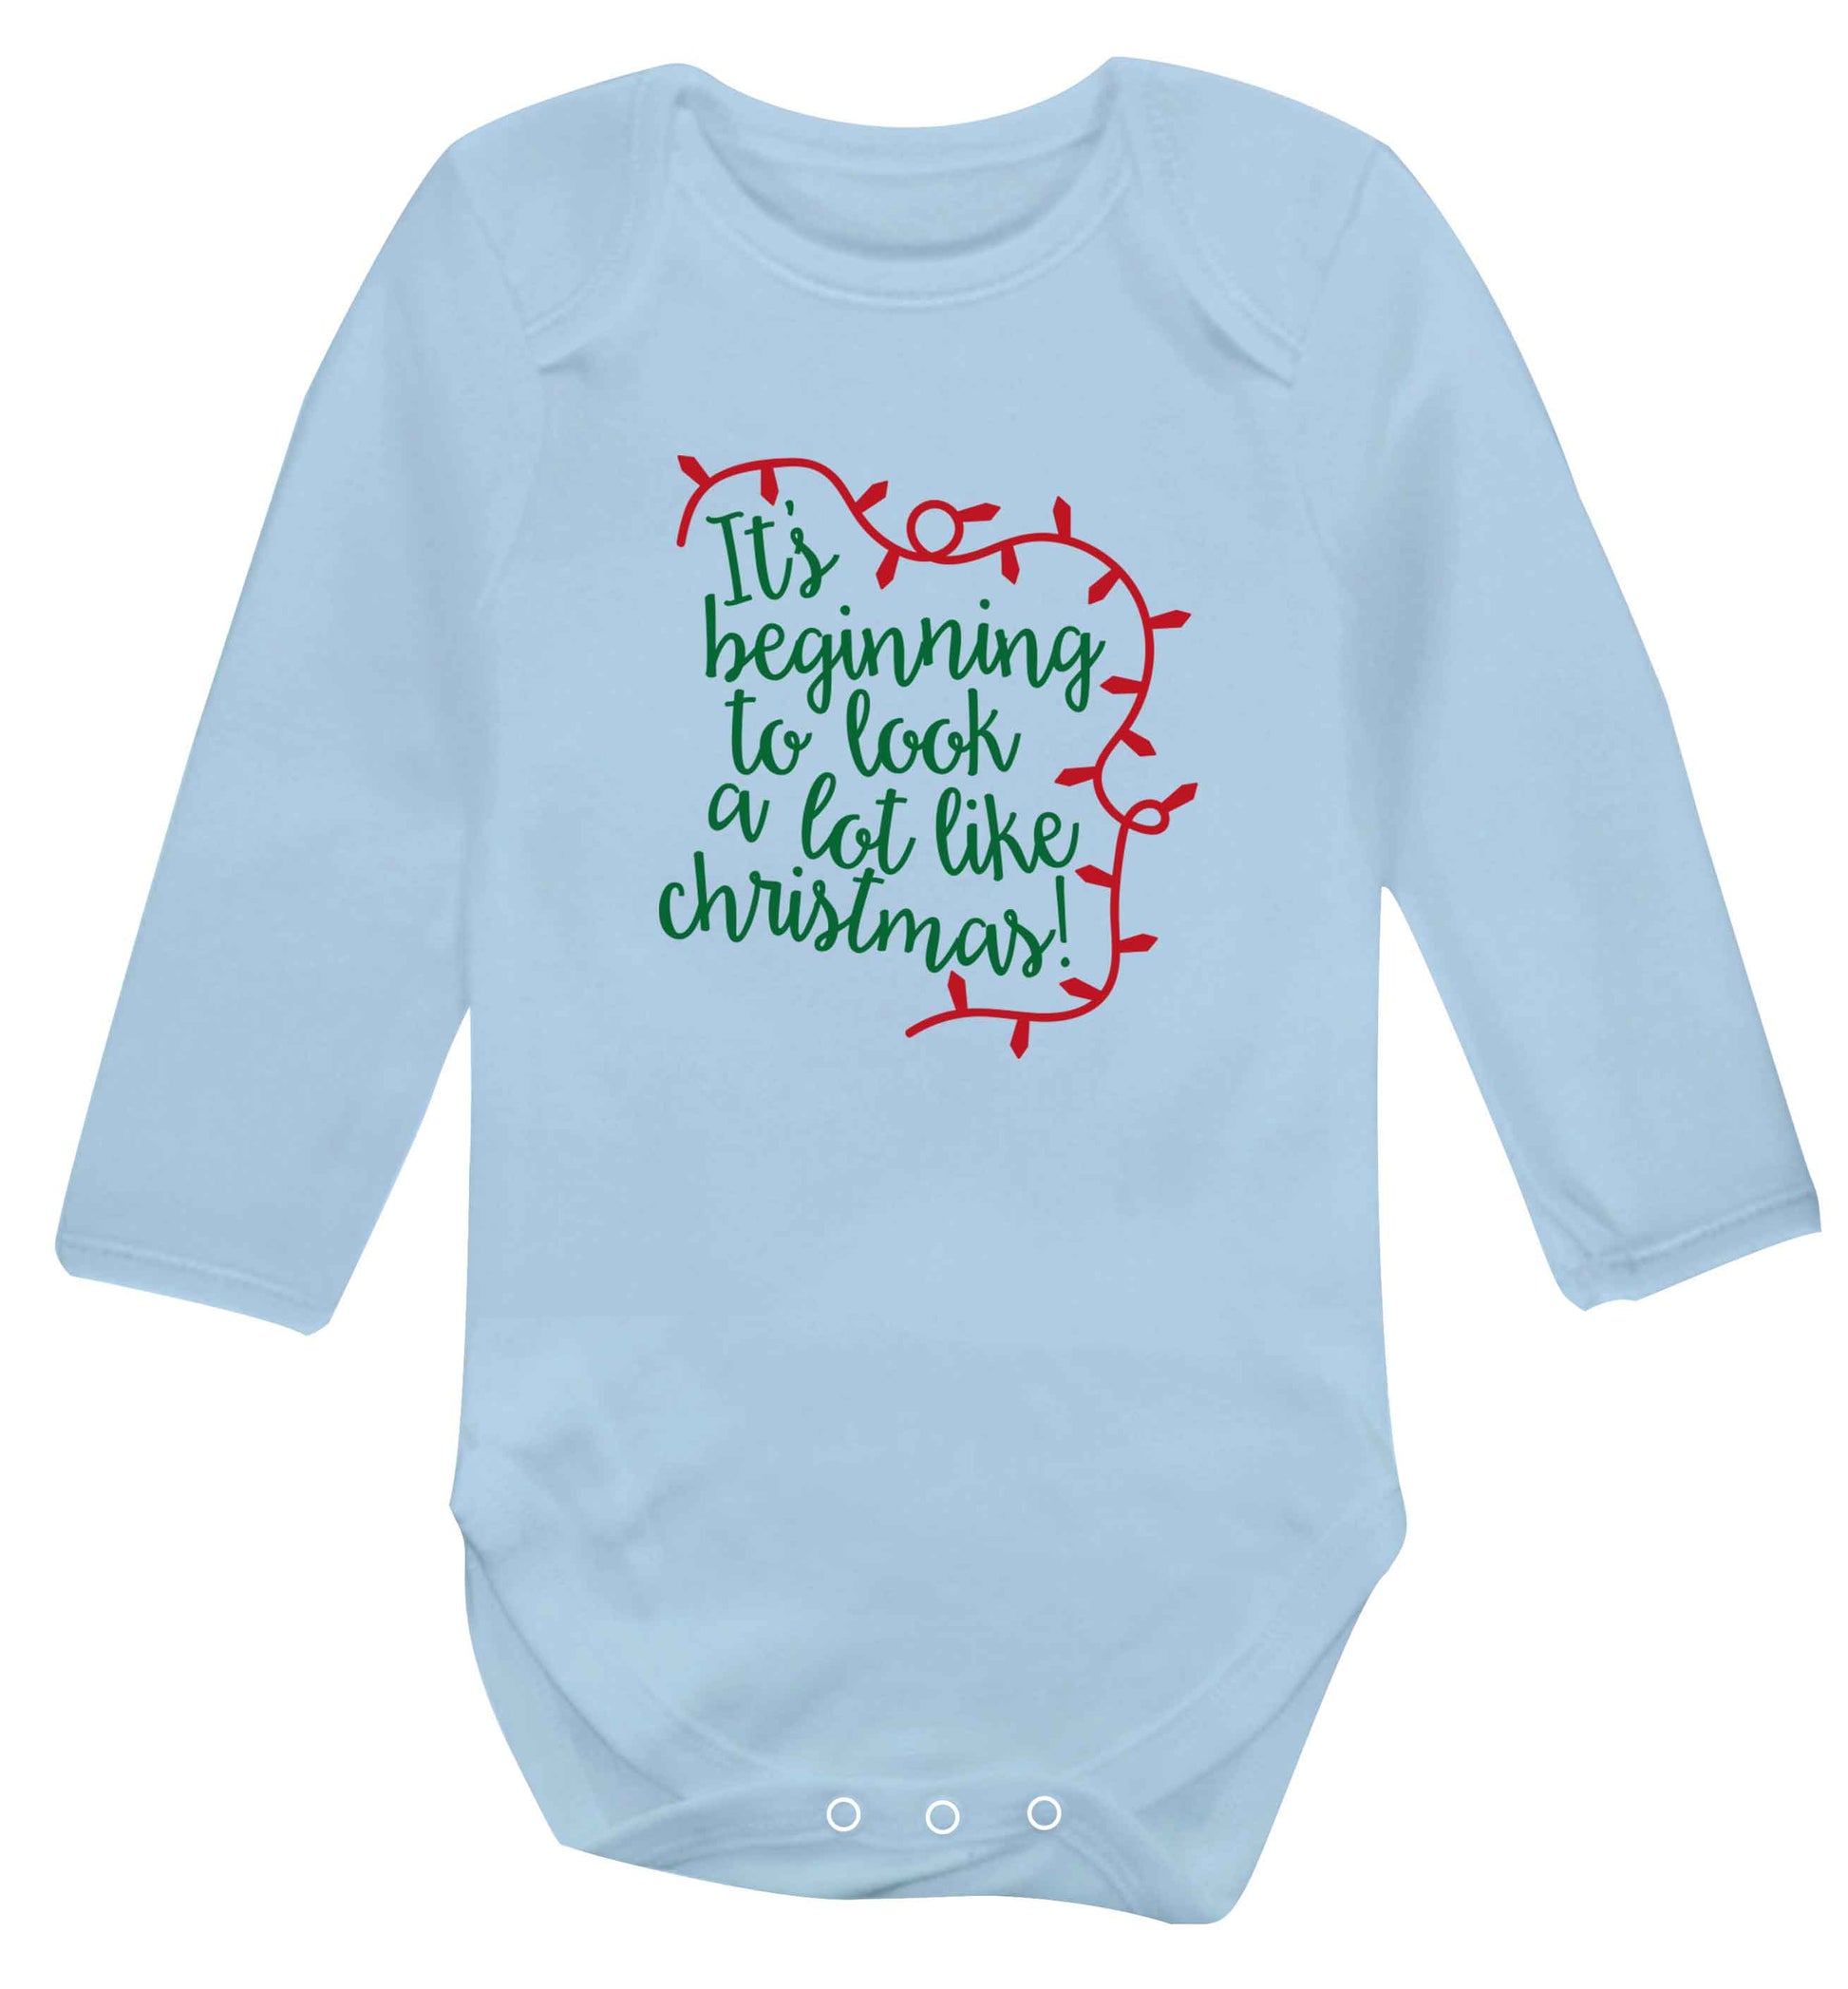 It's beginning to look a lot like Christmas baby vest long sleeved pale blue 6-12 months